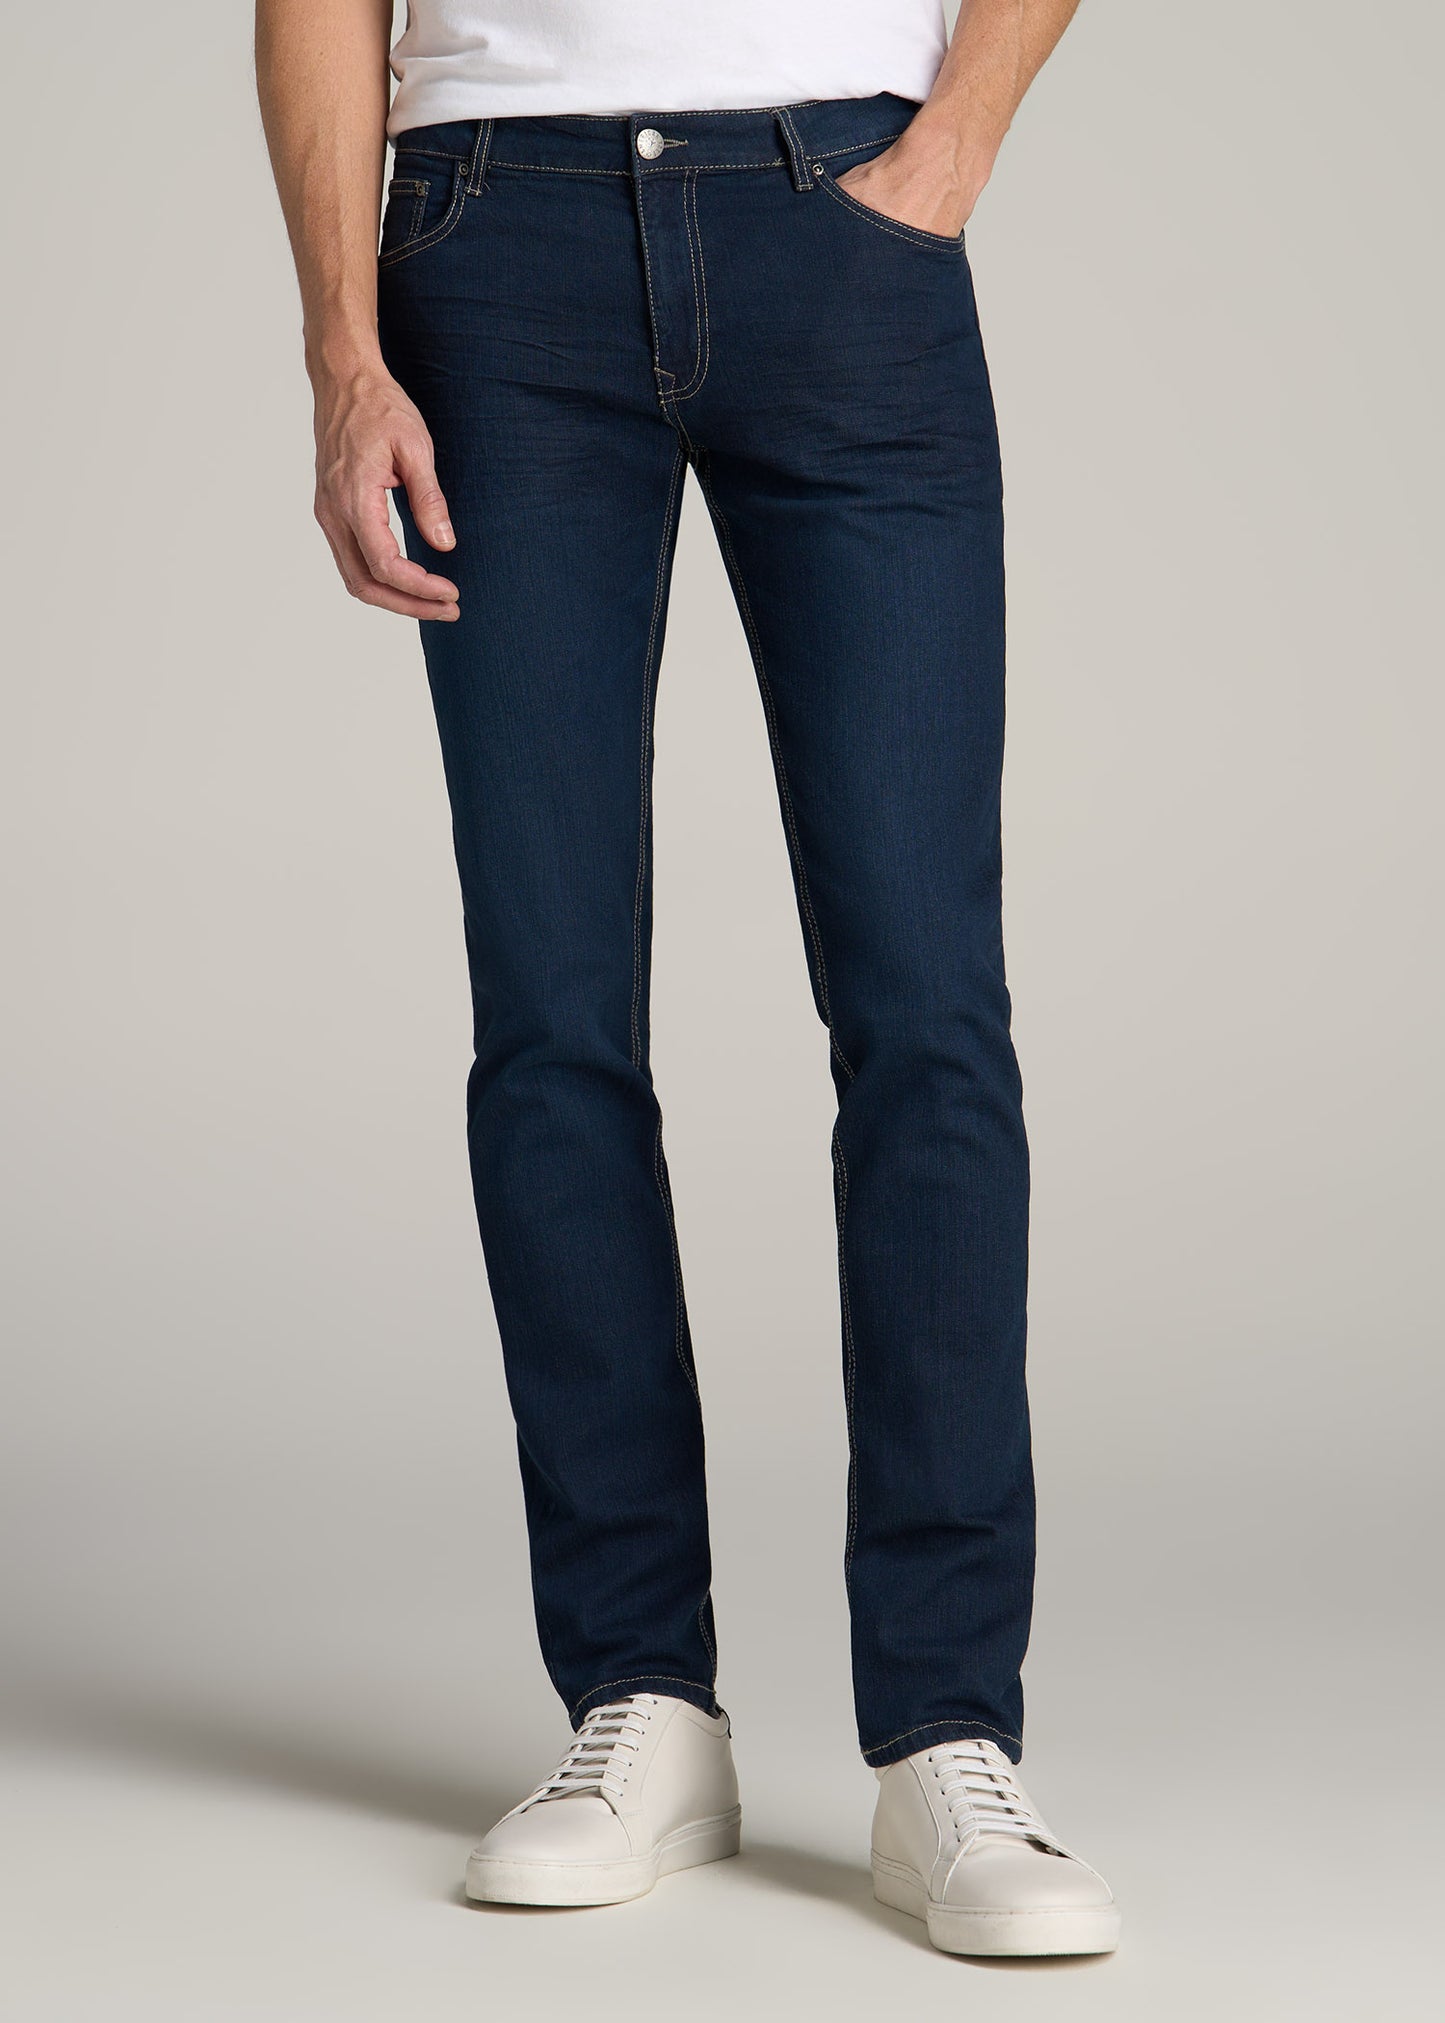 Tall man wearing American Tall's Carman Tapered Jeans in the color Blue-Steel.